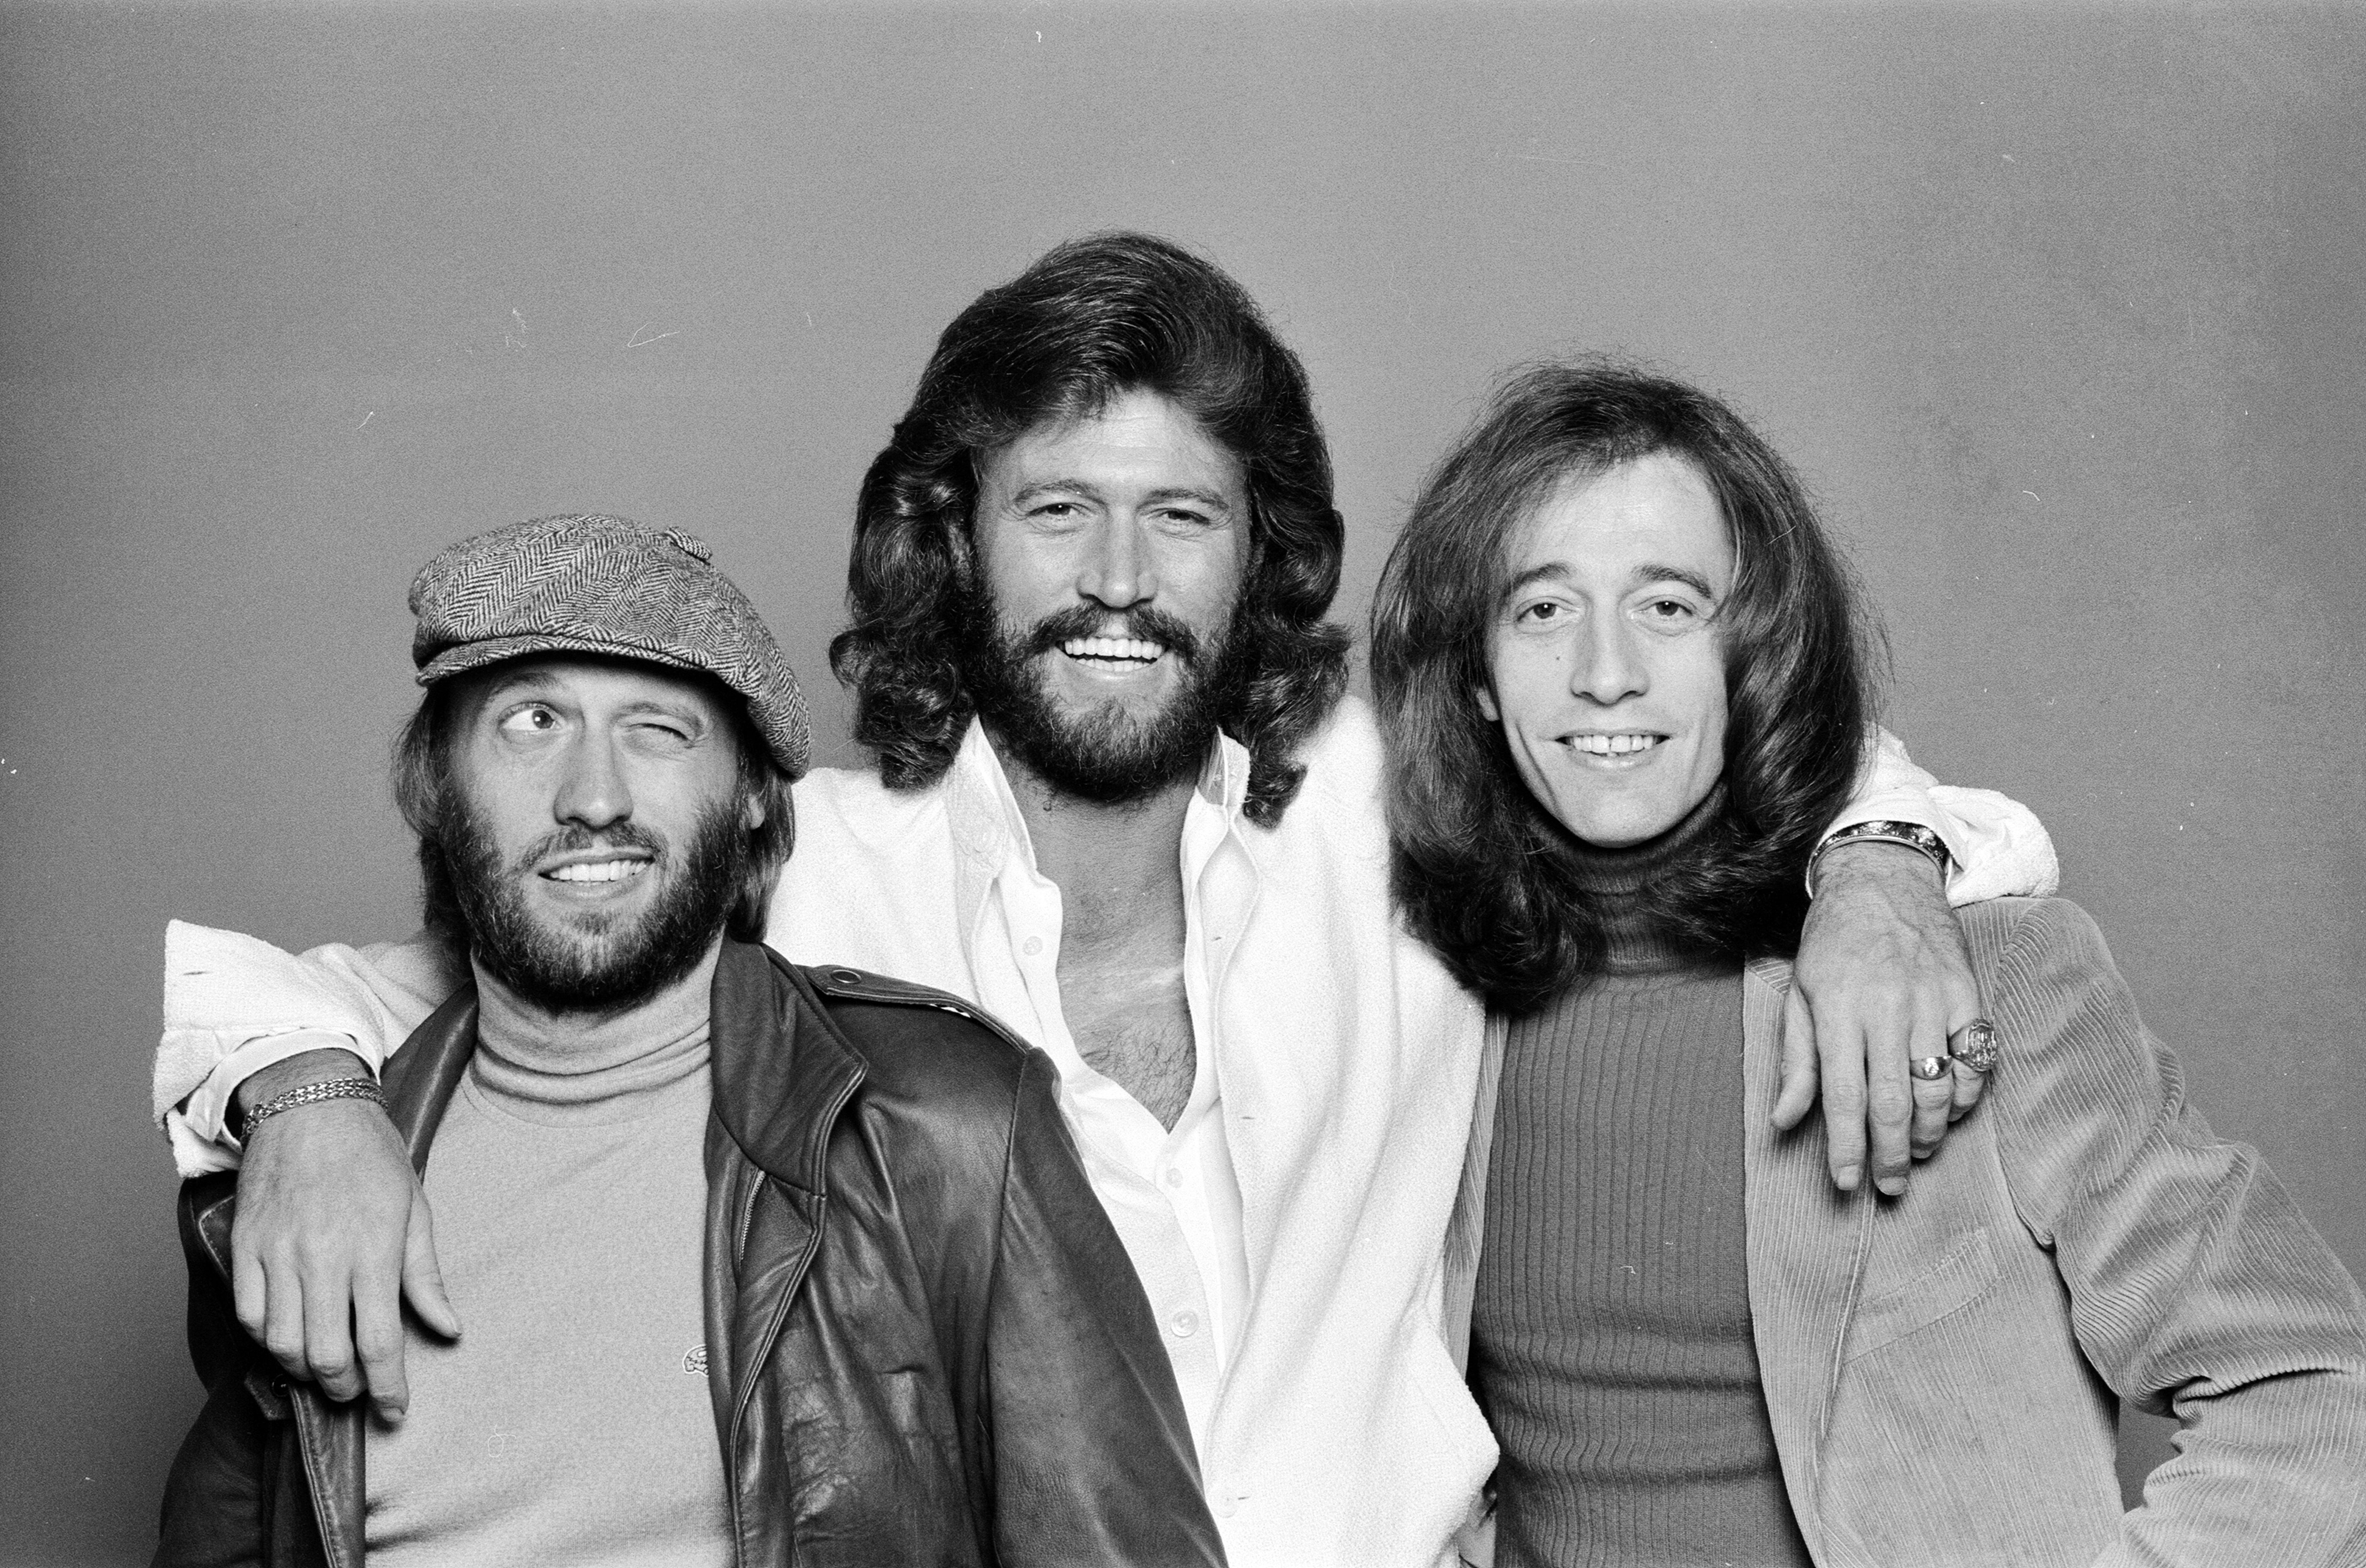 The Bee Gees: Maurice, Barry, and Robin Gibb posing in a black and white picture in 1981 | Source: Getty Images